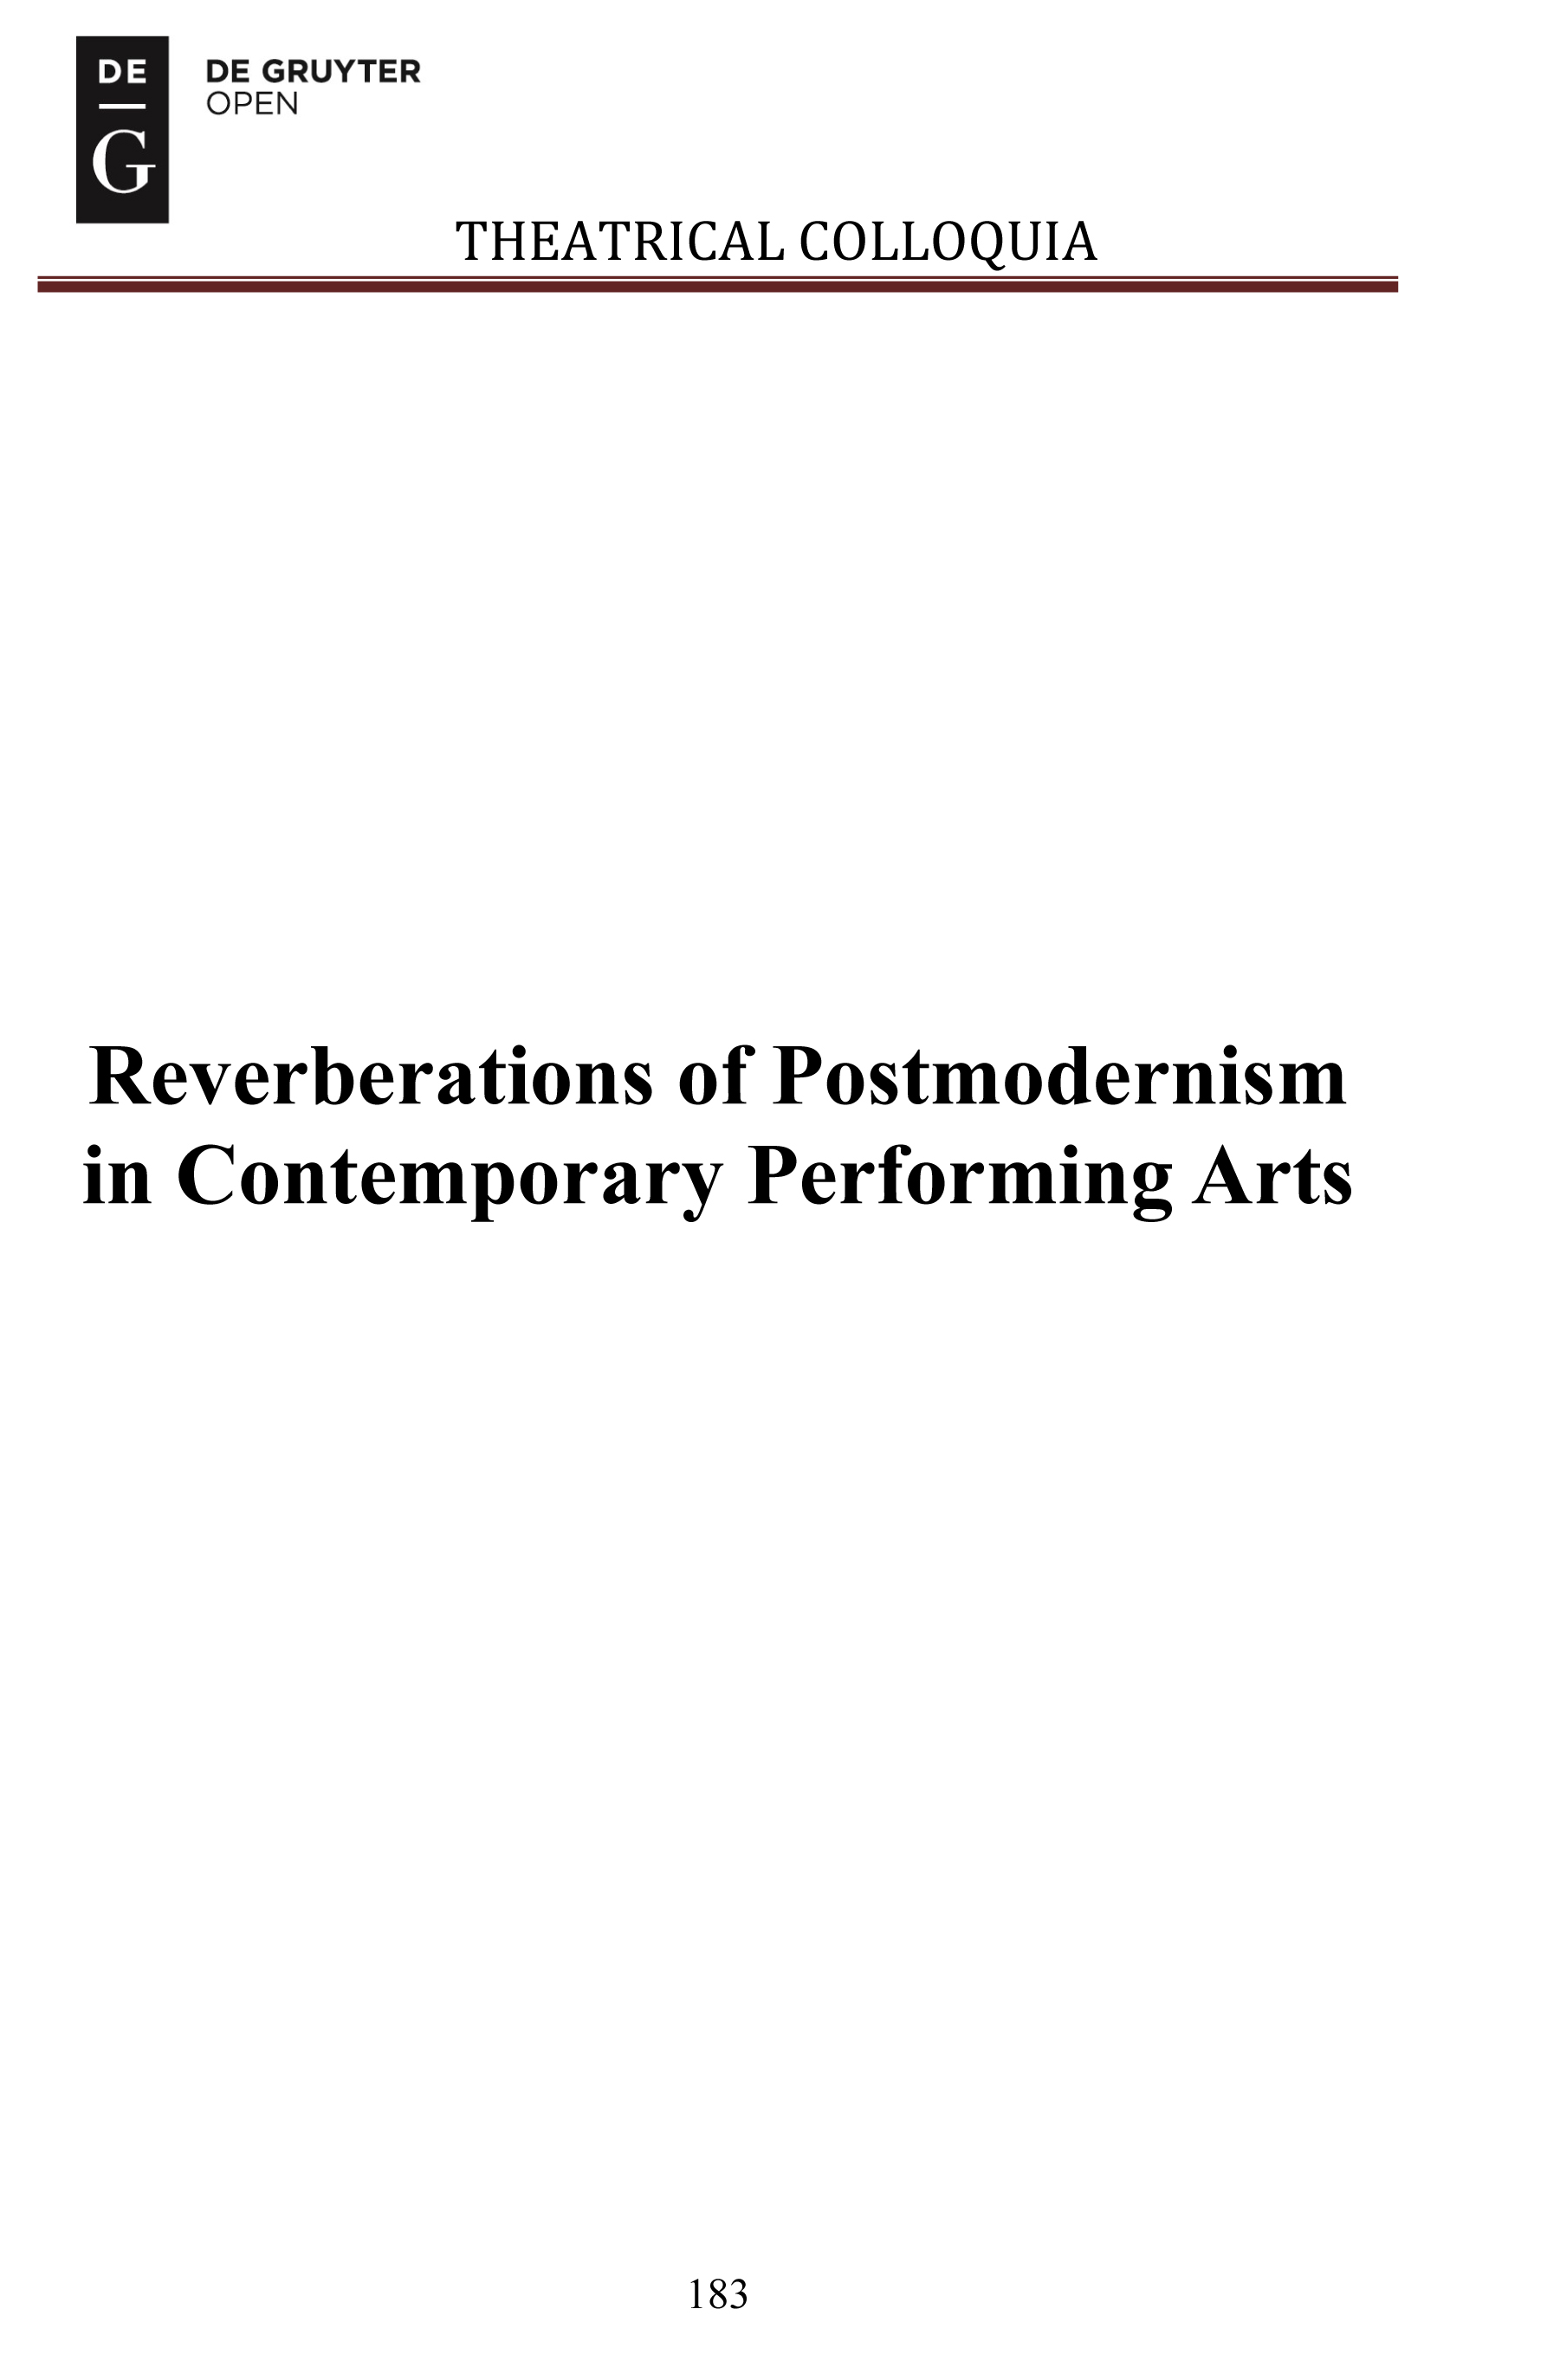 Postmodernism - Between Objective Reality and Subjective Artistic Impulse Markings into Romanian Sound Art